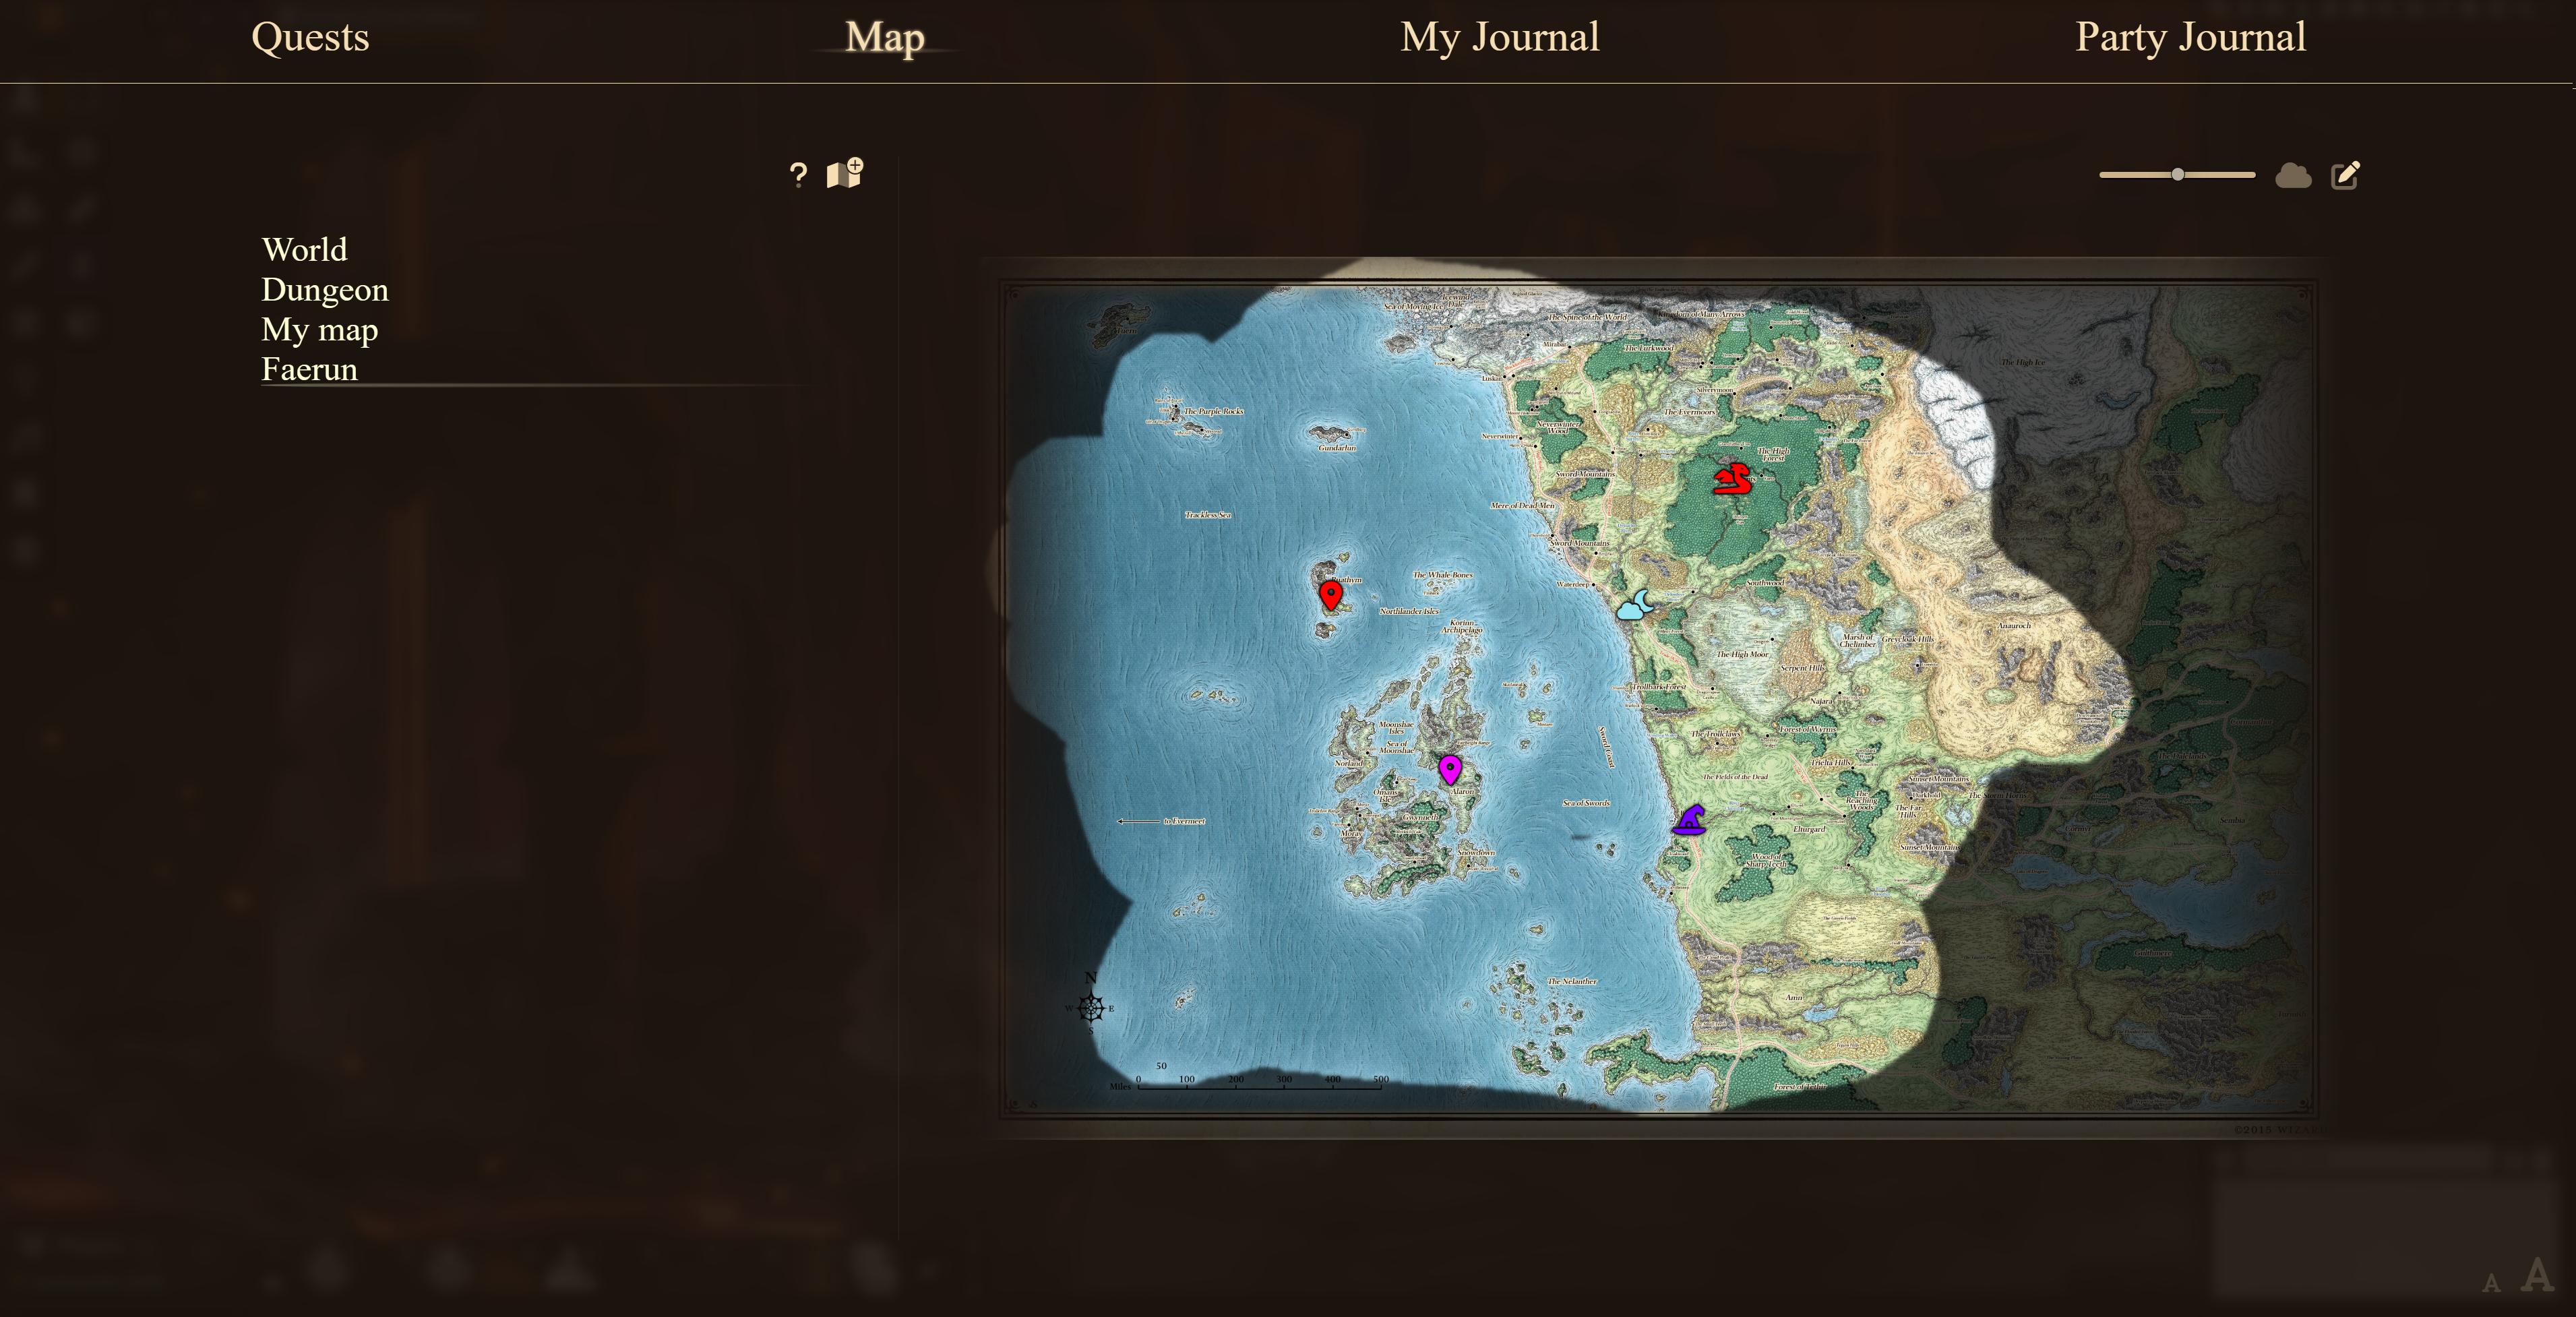 Simple Quest Map Tab